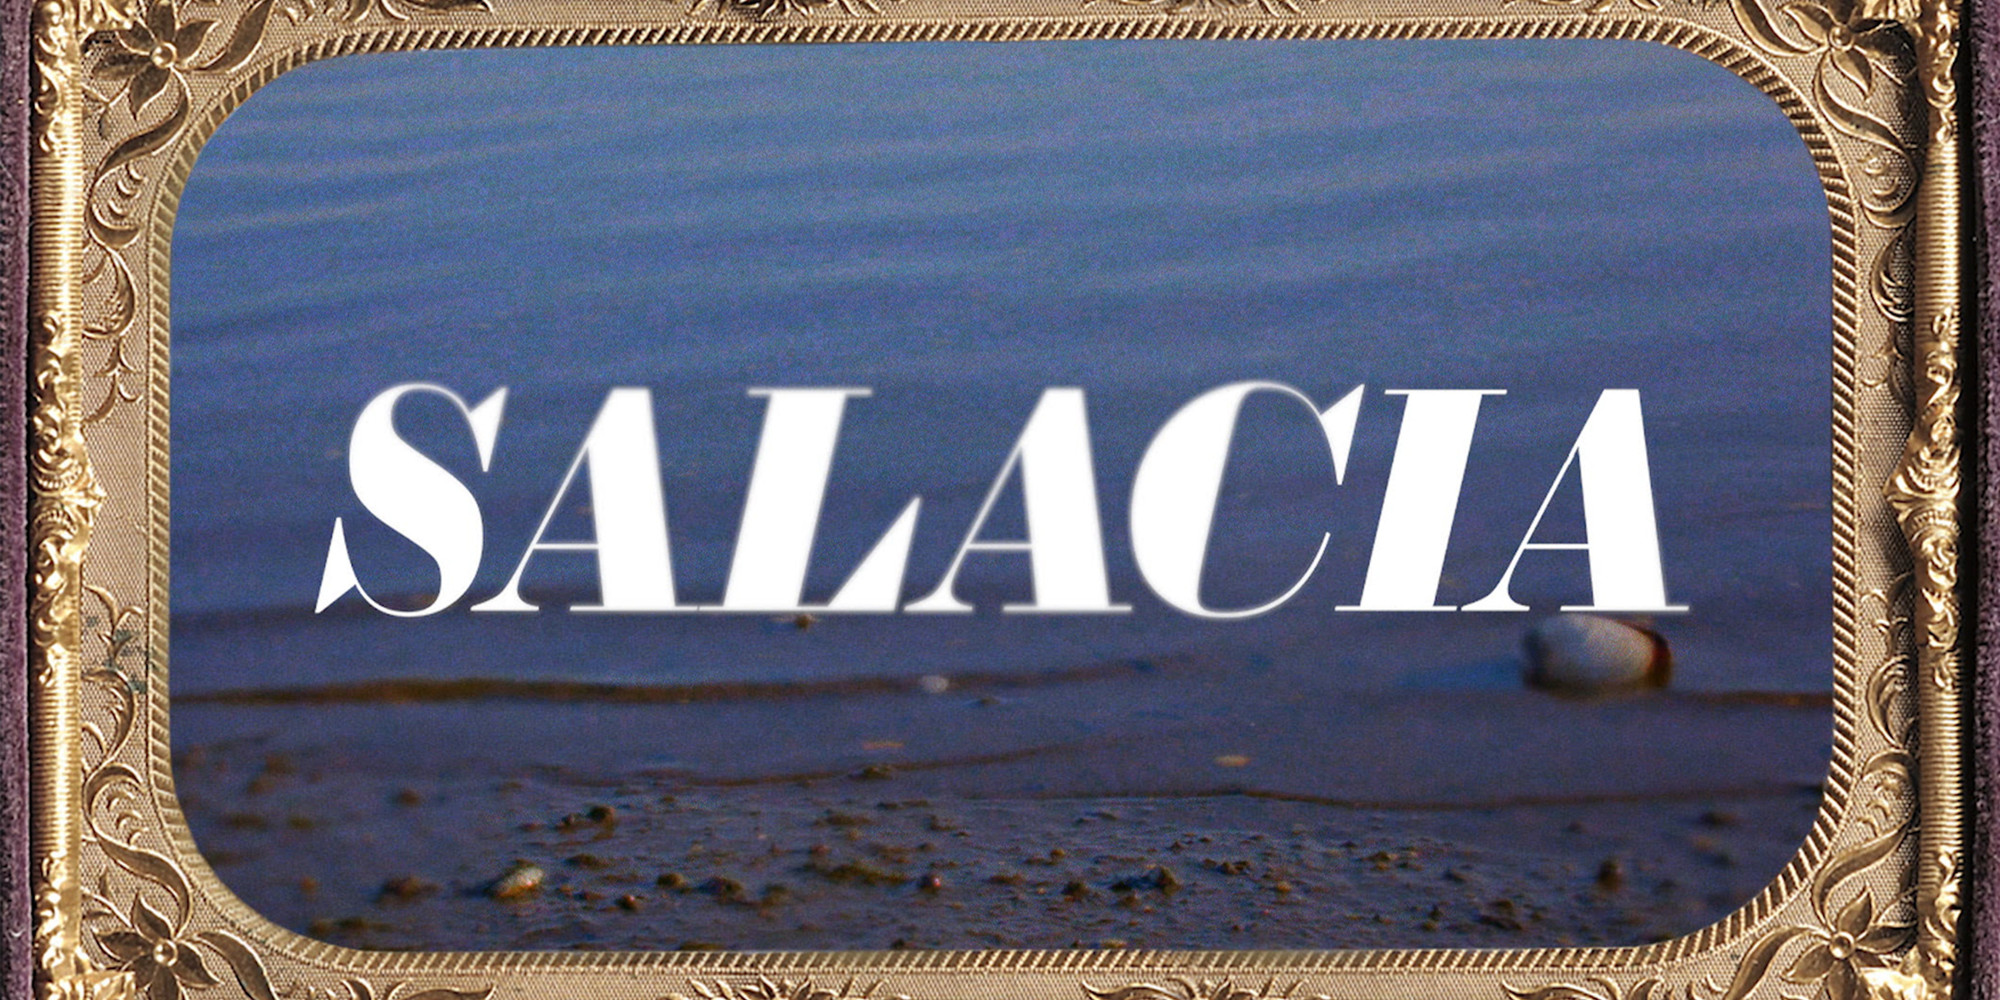 Tourmaline. Salacia. 2019. Video (color, sound), 6 min. The Museum of Modern Art, New York. Acquired through the generosity of The Lumpkin-Boccuzzi Family Collection. © 2020 Tourmaline. Courtesy of the artist